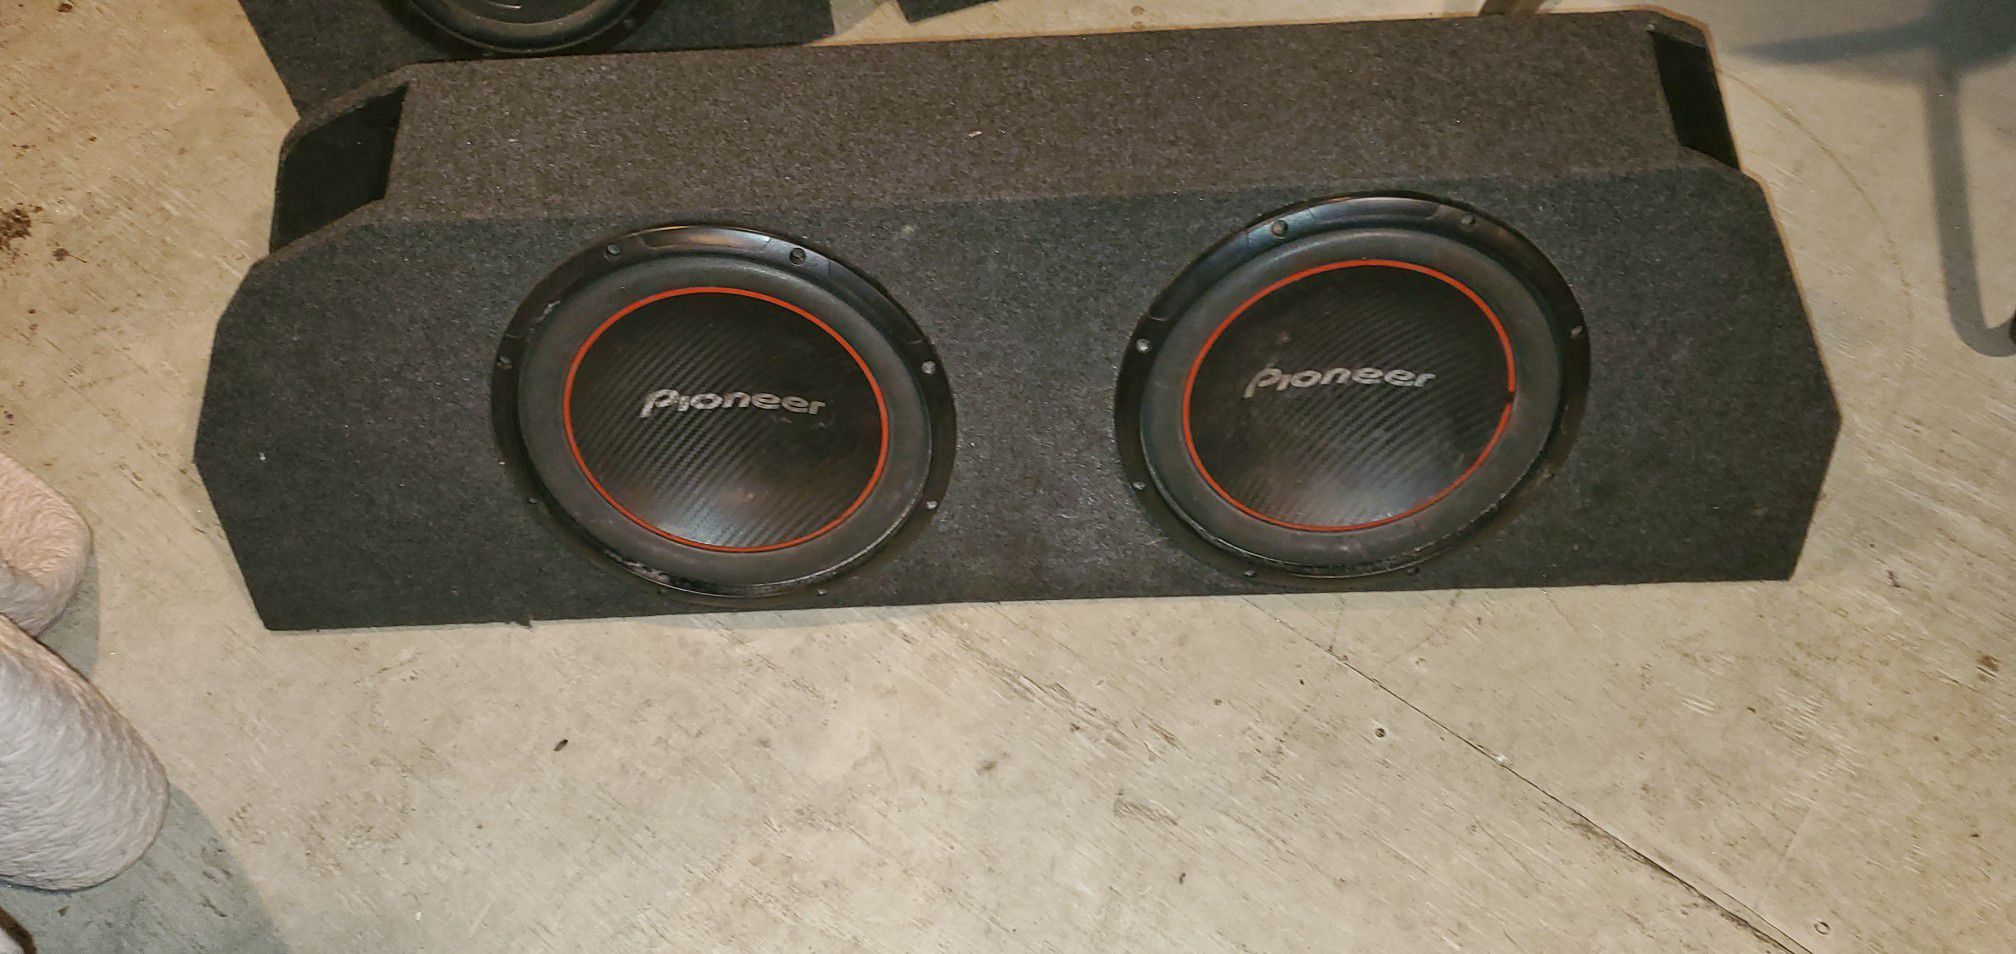 Pioneer 12 inch subwoofers and box